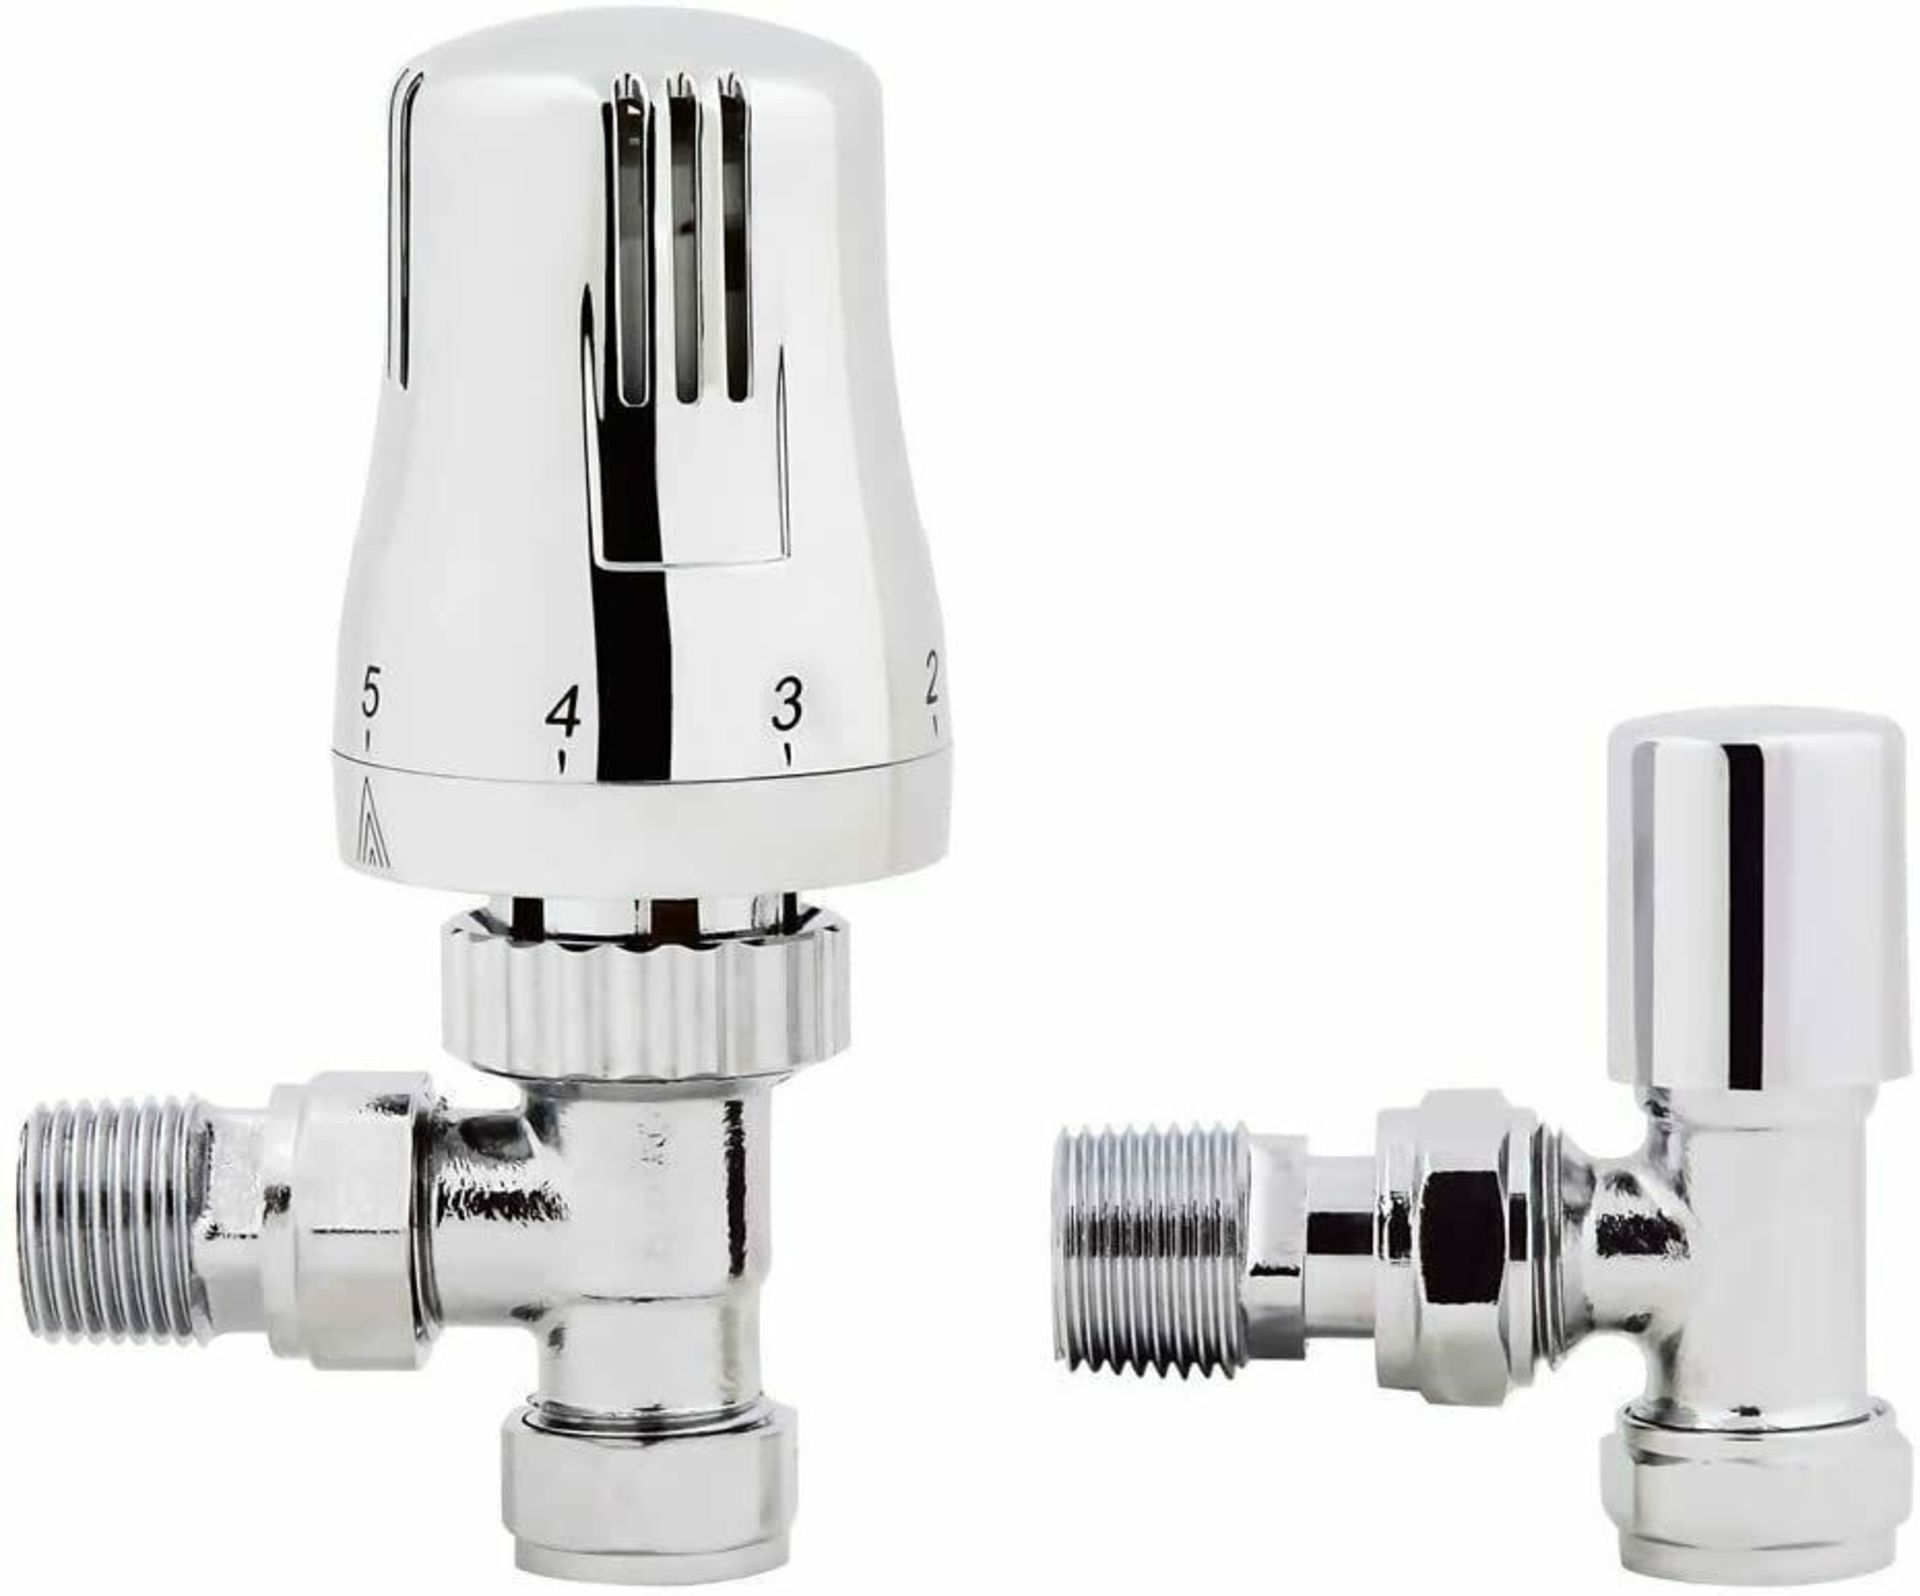 New & Boxed Chrome Thermostatic Control Angled Designer Radiator Valves Pair 15mm New. RRP £49...